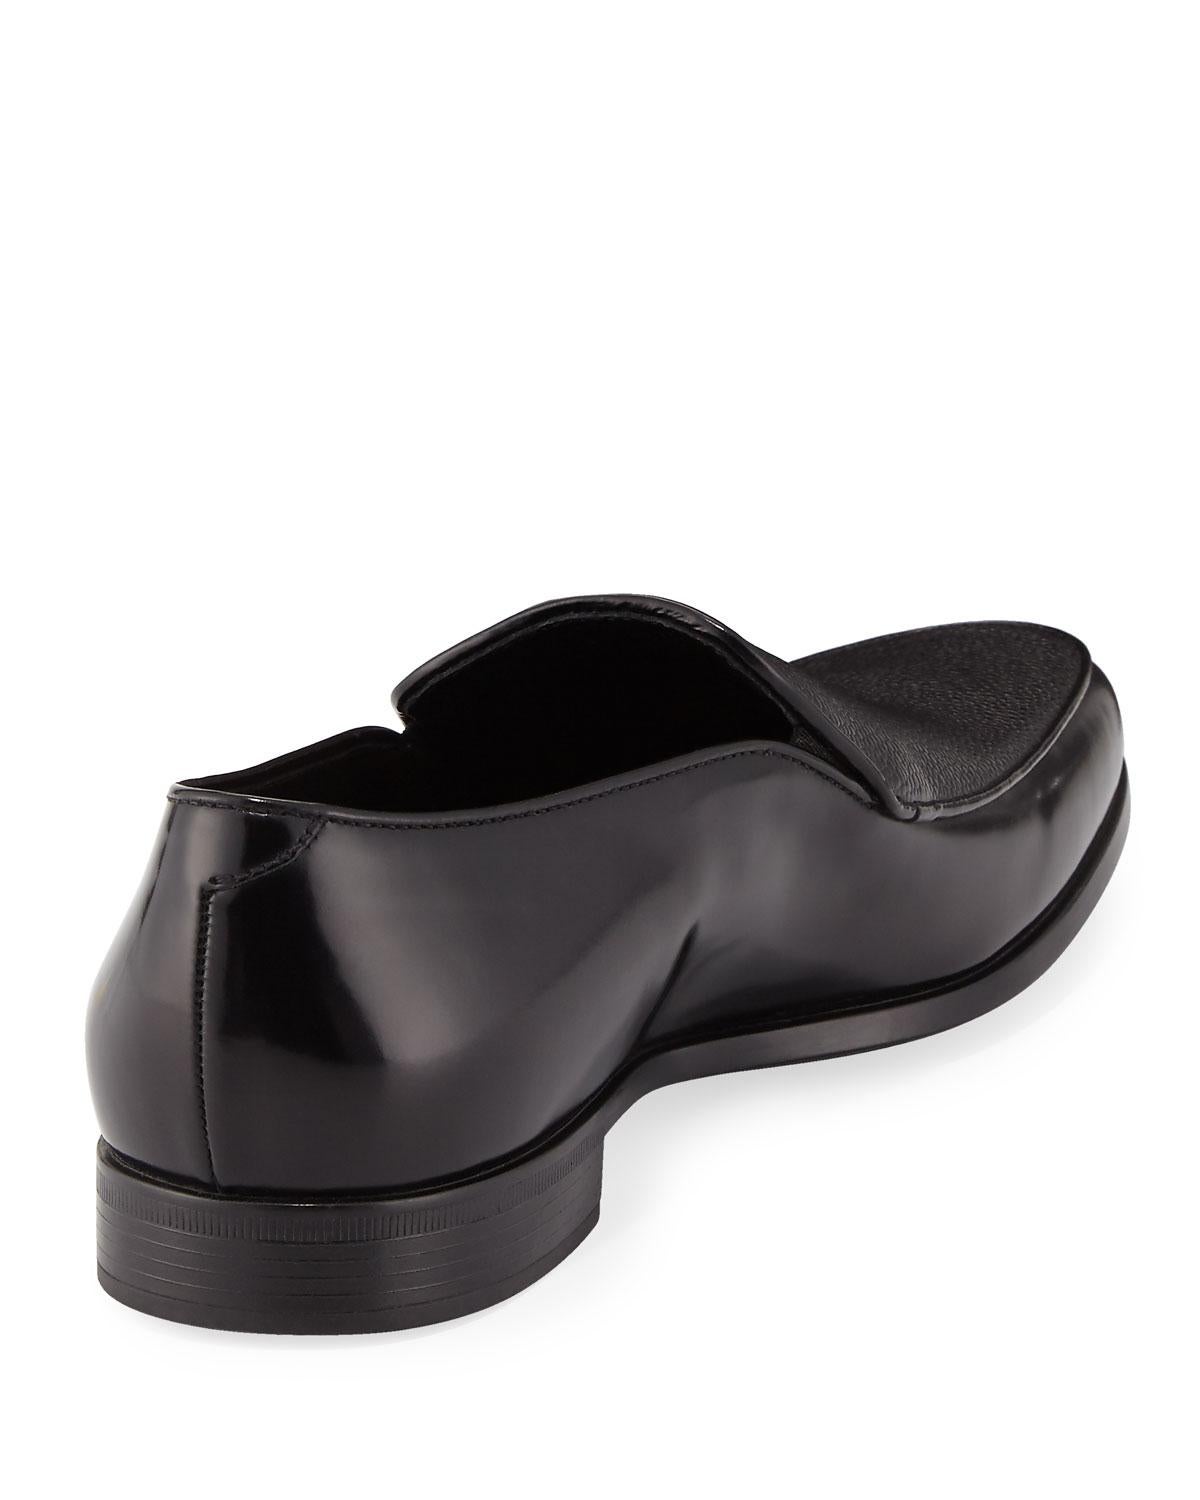 Compliment your day or night wear with Giorgio Armani's Saffiano Loafer. This shoe features patent calf leather, an upscale inspired saffiano leather vamp, with a tapered apron toe. Introduce your well traveled qualities with your Venetian vamp and